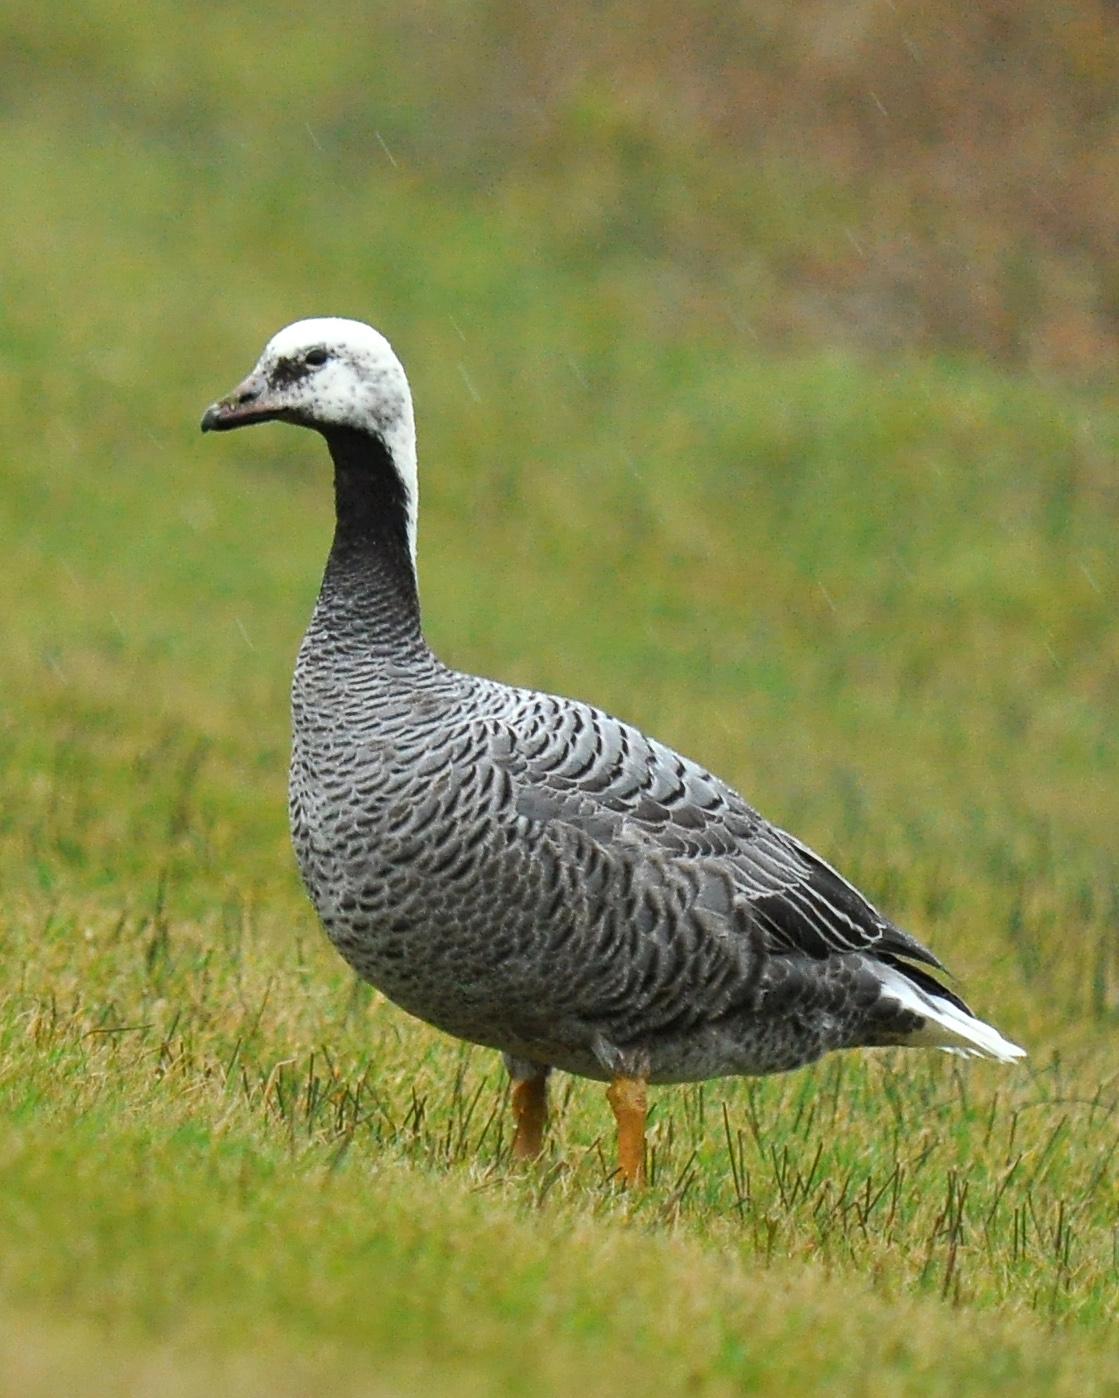 Emperor Goose Photo by Ryan P. O'Donnell